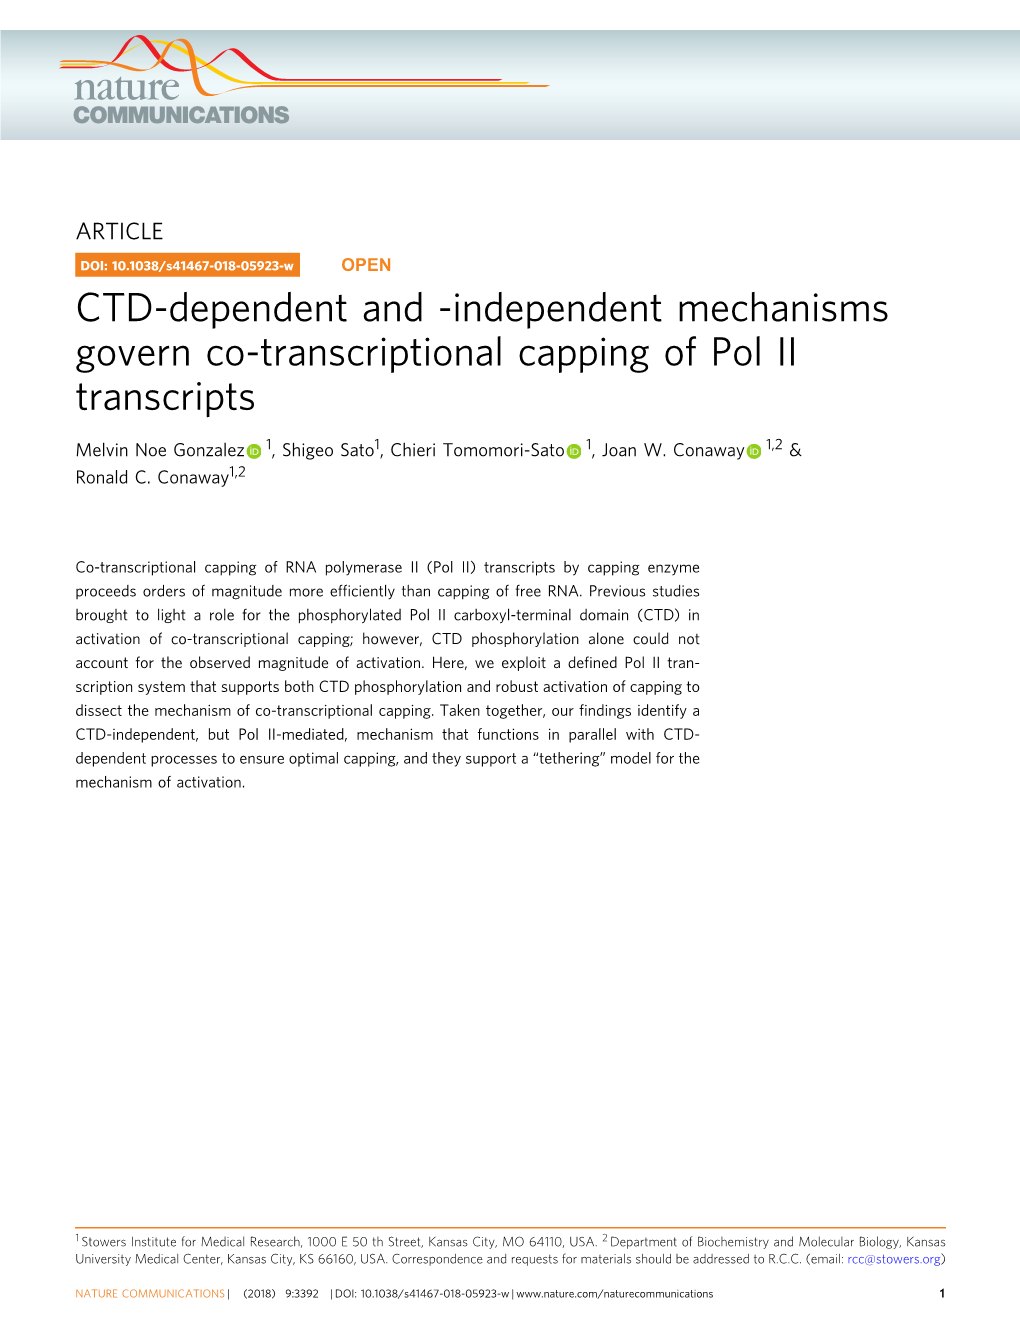 Independent Mechanisms Govern Co-Transcriptional Capping of Pol II Transcripts